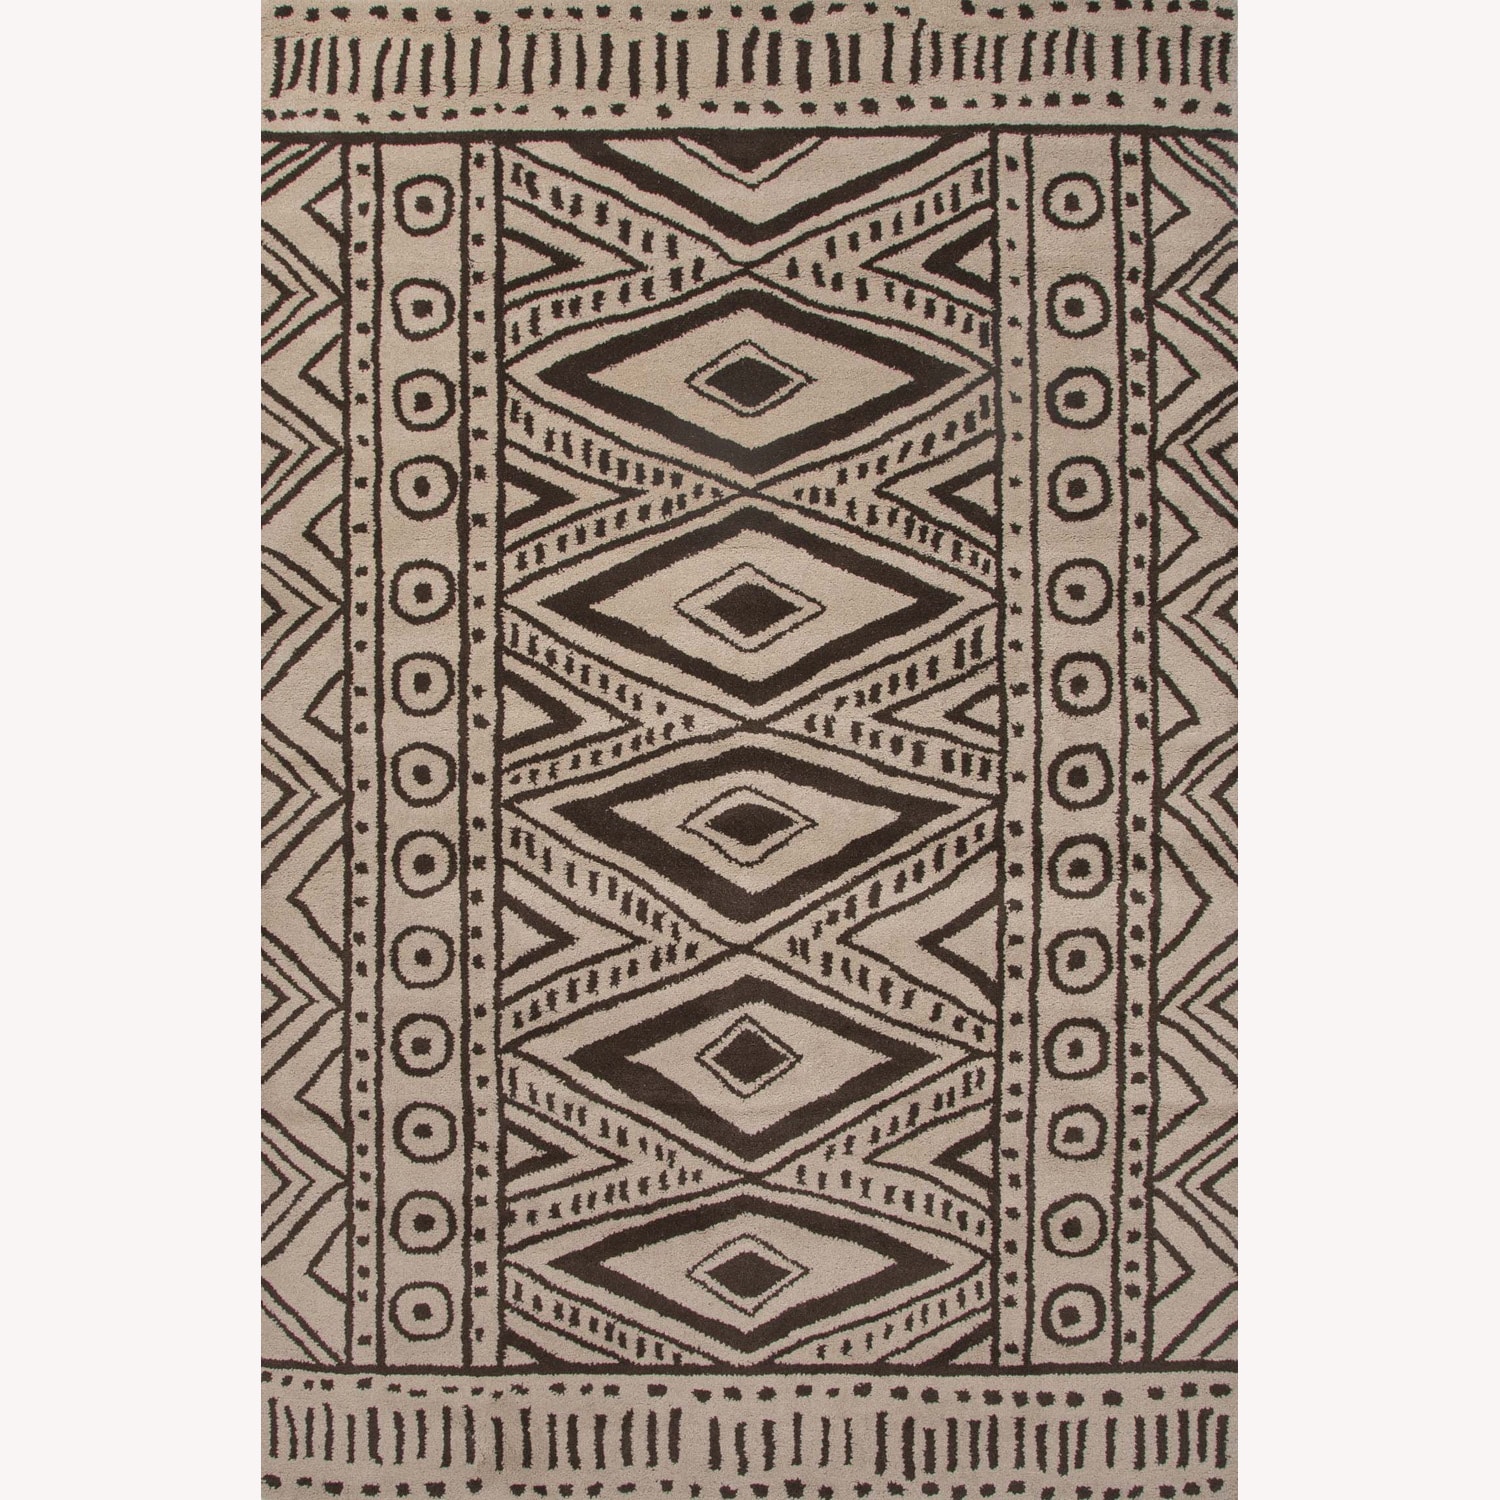 Hand Tufted Abstract Pattern Ivory/black Wool Rug (5x8)